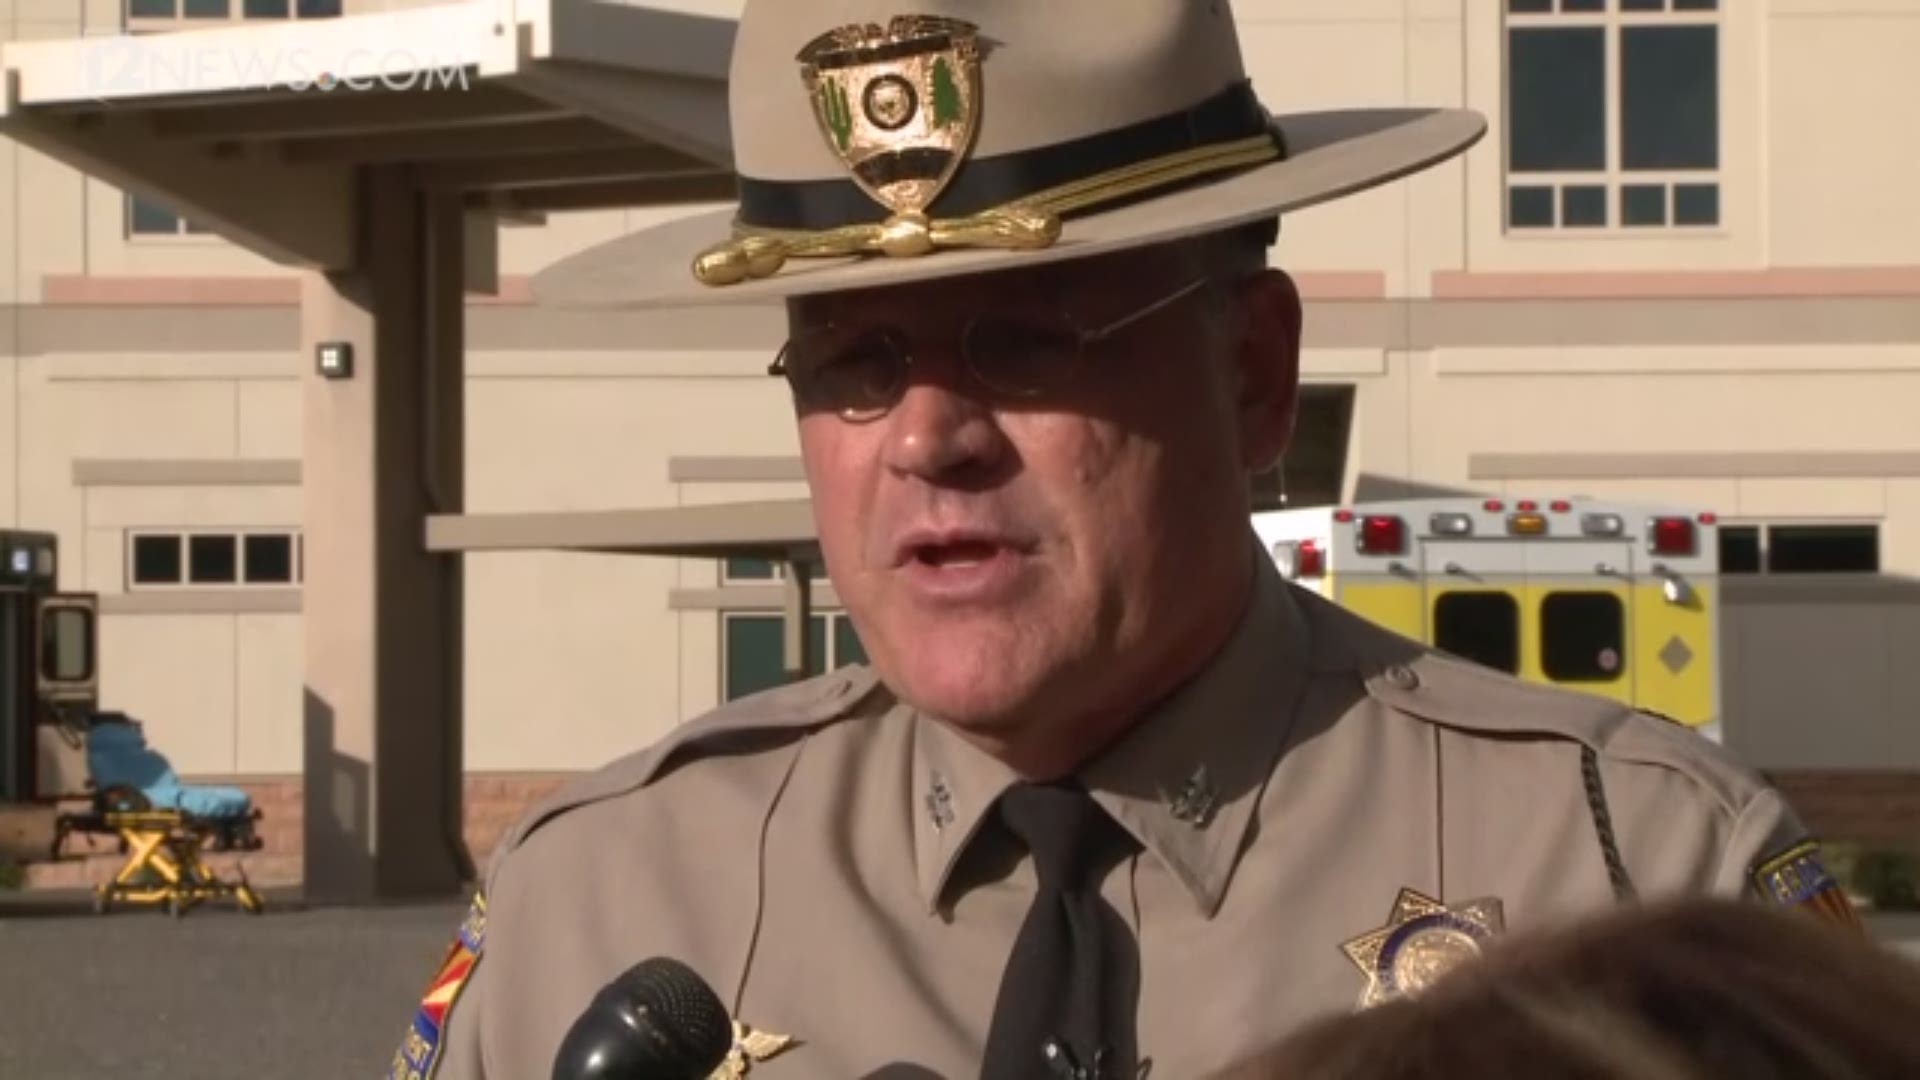 FULL: Authorities give update on DPS trooper shot early Thursday morning.